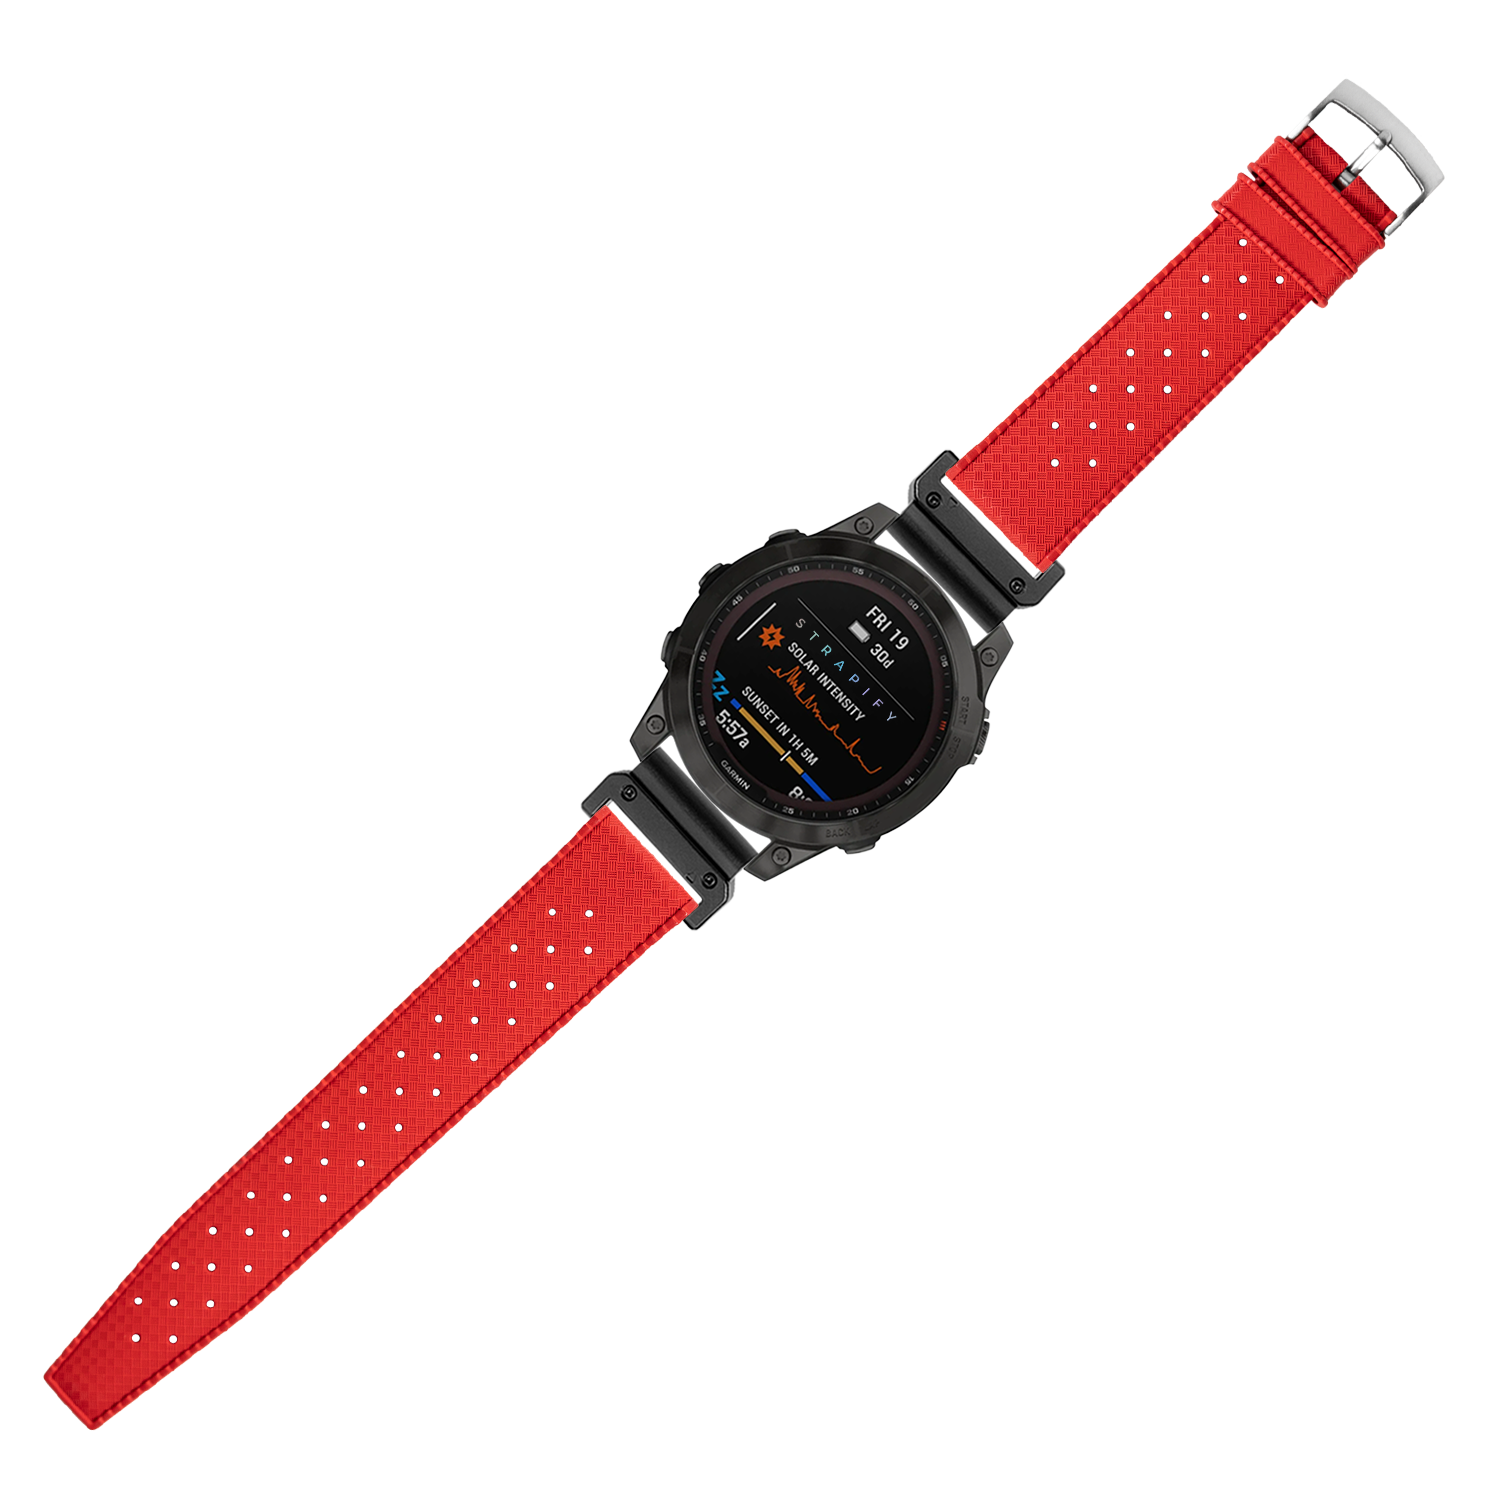 [QuickFit] King Tropic FKM Rubber - Red 22mm